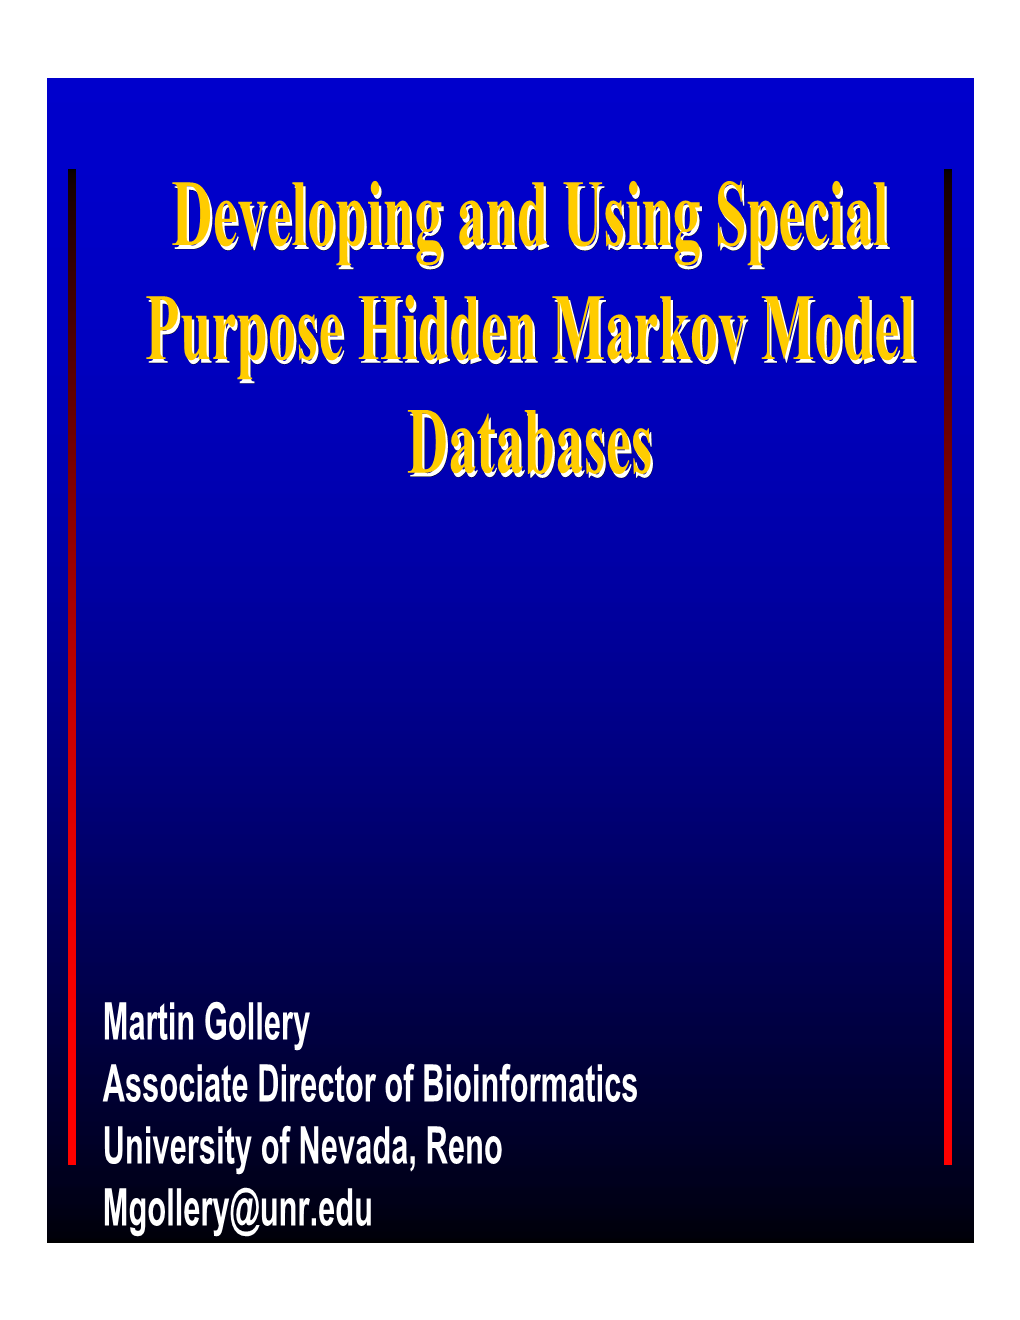 Developing and Using Special Purpose Hidden Markov Model Databases Developing and Using Special Purpose Hidden Markov Model Data